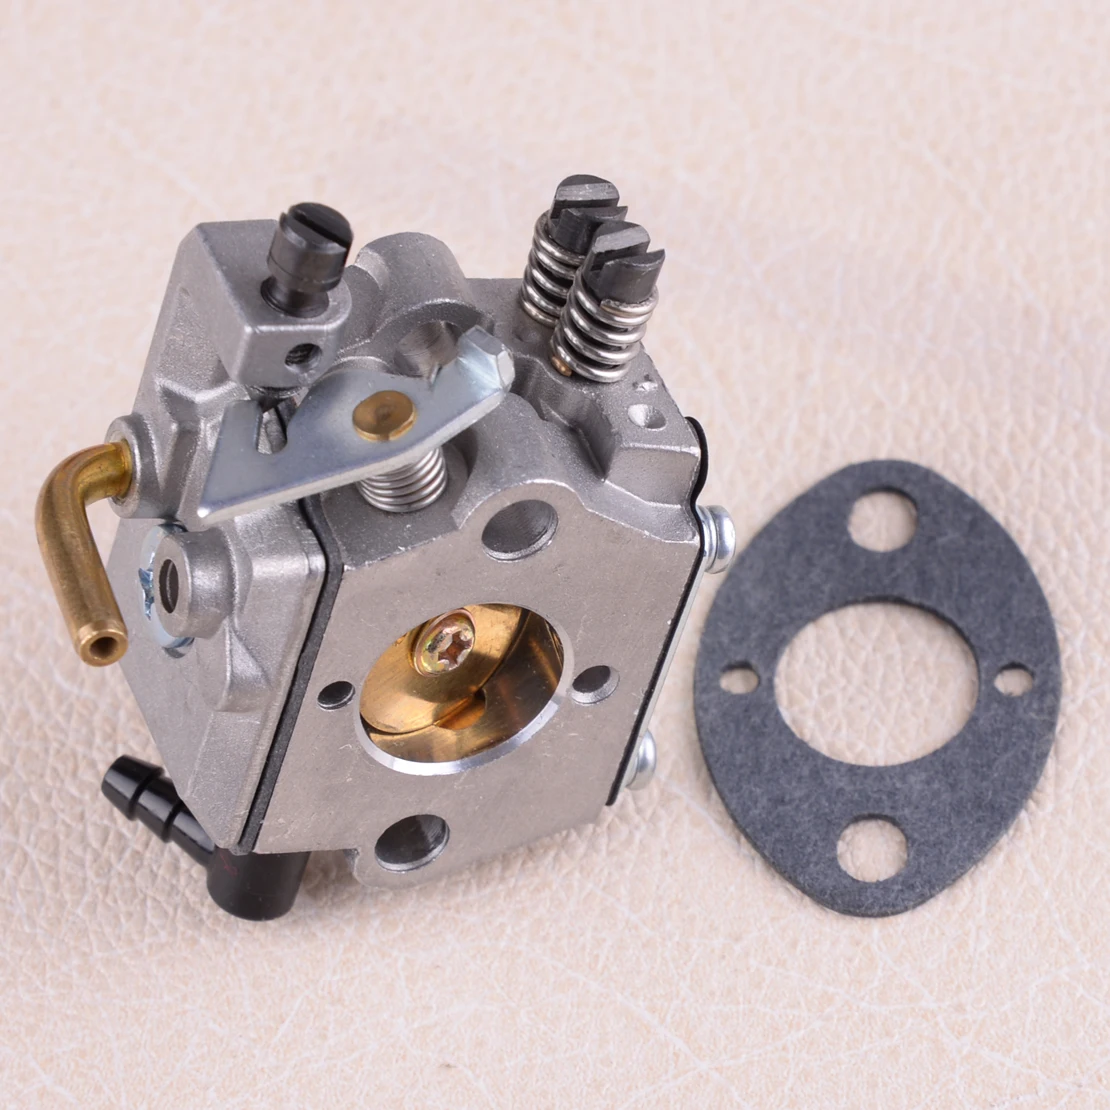 

LETAOSK Carburetor 5.9x5x2.9cm Carb with Gasket Tool Fit for Stihl 024 026 MS260 MS240 024AV 024S WT-194 HU-136A